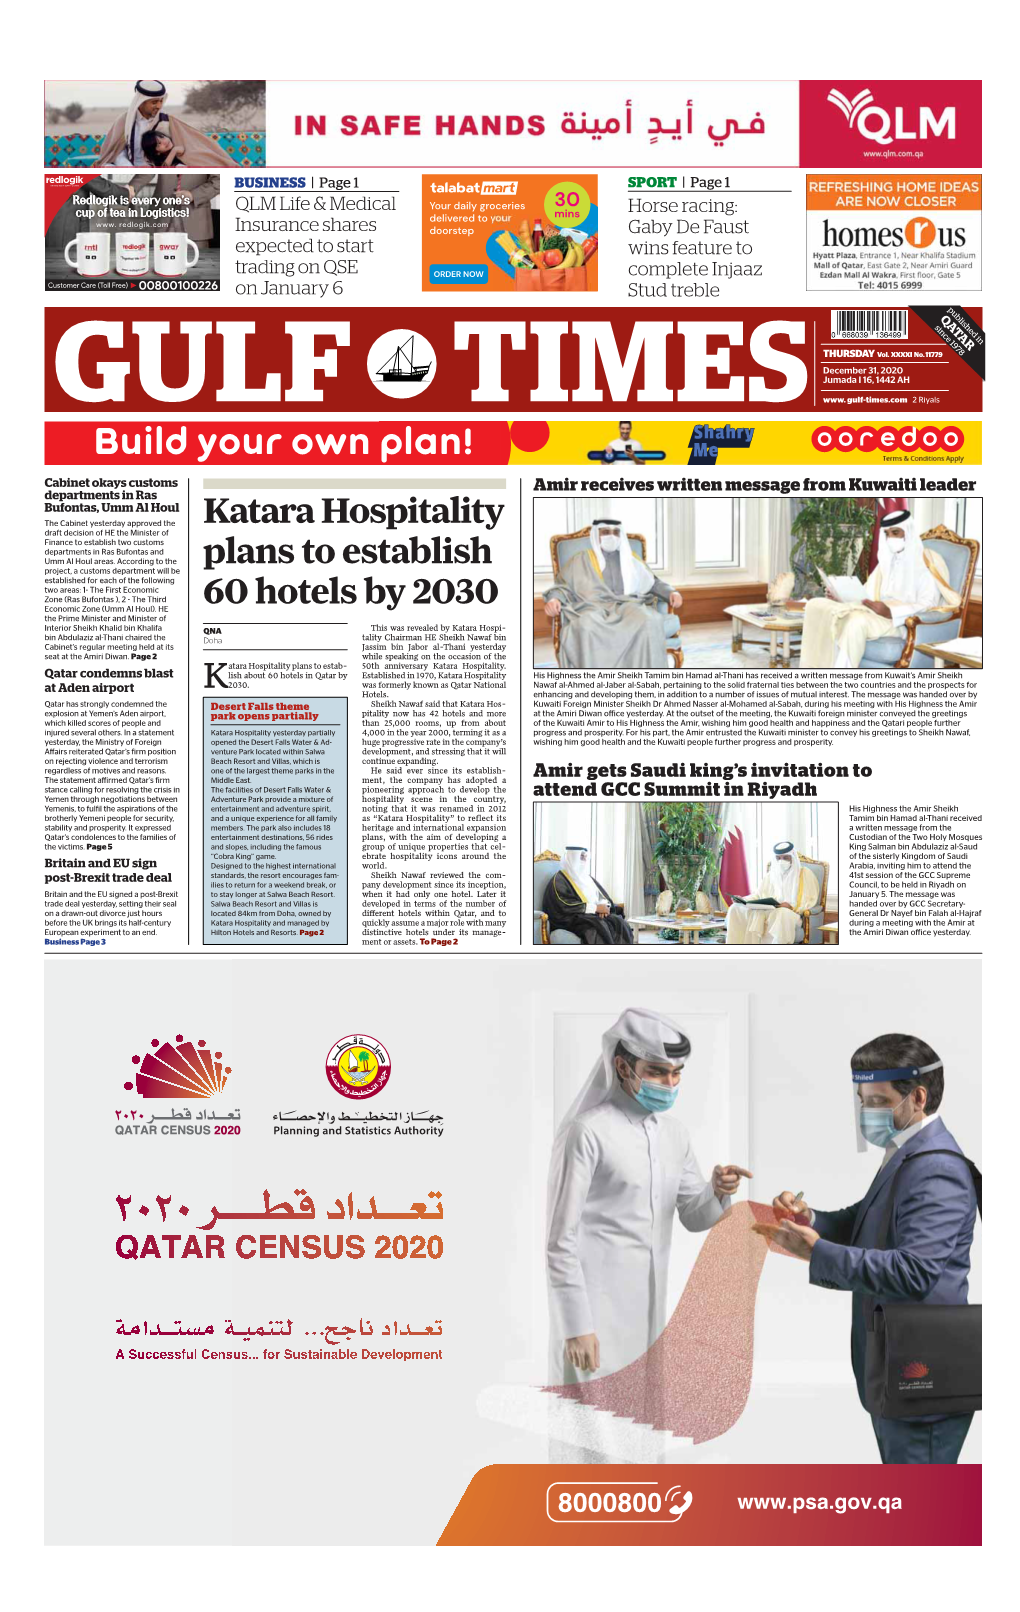 Katara Hospitality Plans to Establish 60 Hotels by 2030 from Page 1